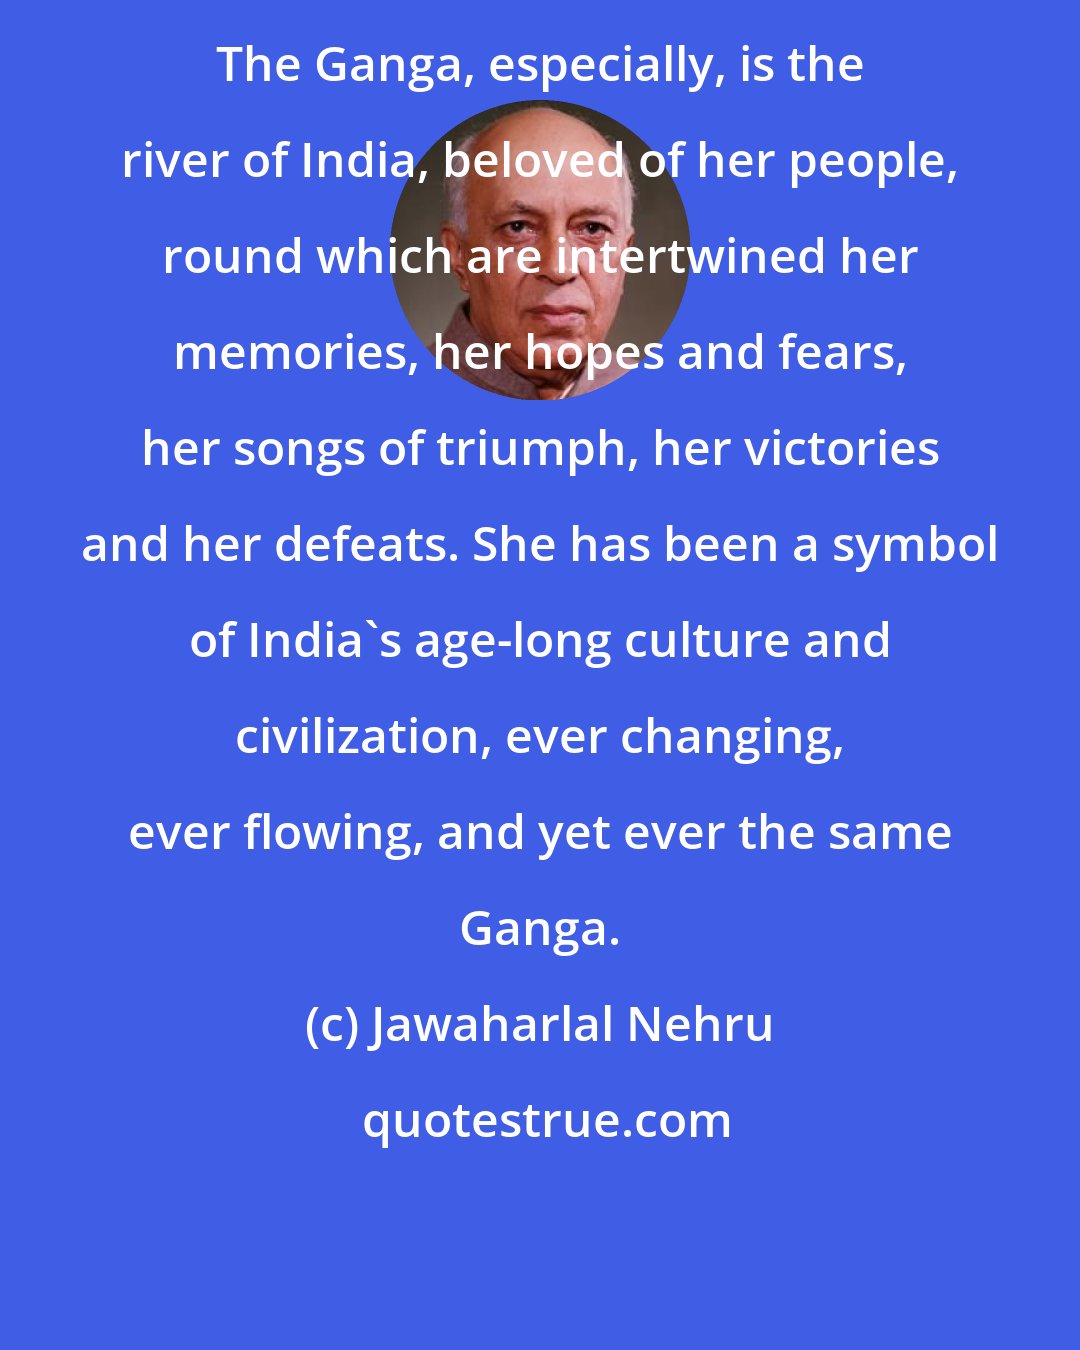 Jawaharlal Nehru: The Ganga, especially, is the river of India, beloved of her people, round which are intertwined her memories, her hopes and fears, her songs of triumph, her victories and her defeats. She has been a symbol of India's age-long culture and civilization, ever changing, ever flowing, and yet ever the same Ganga.